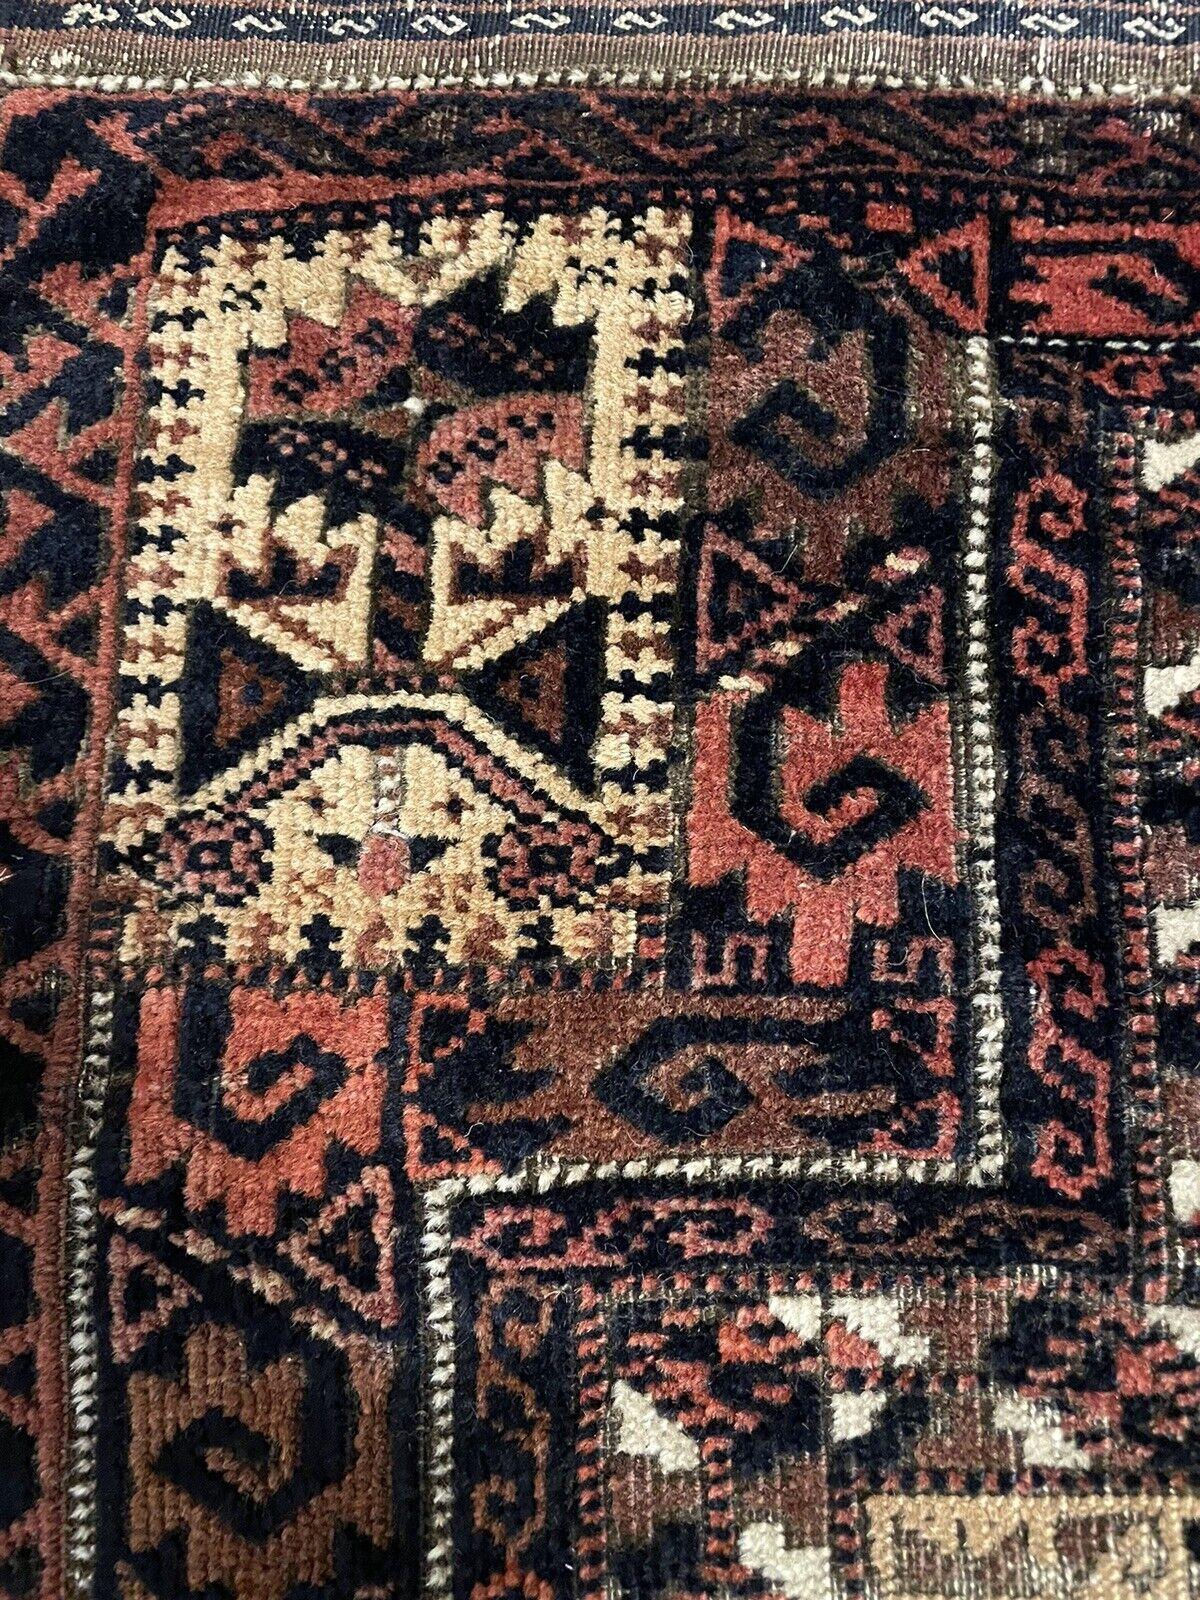 Handmade Antique Afghan Baluch Collectible Rug 2.5' x 4.6', 1880s - 1N18 For Sale 1